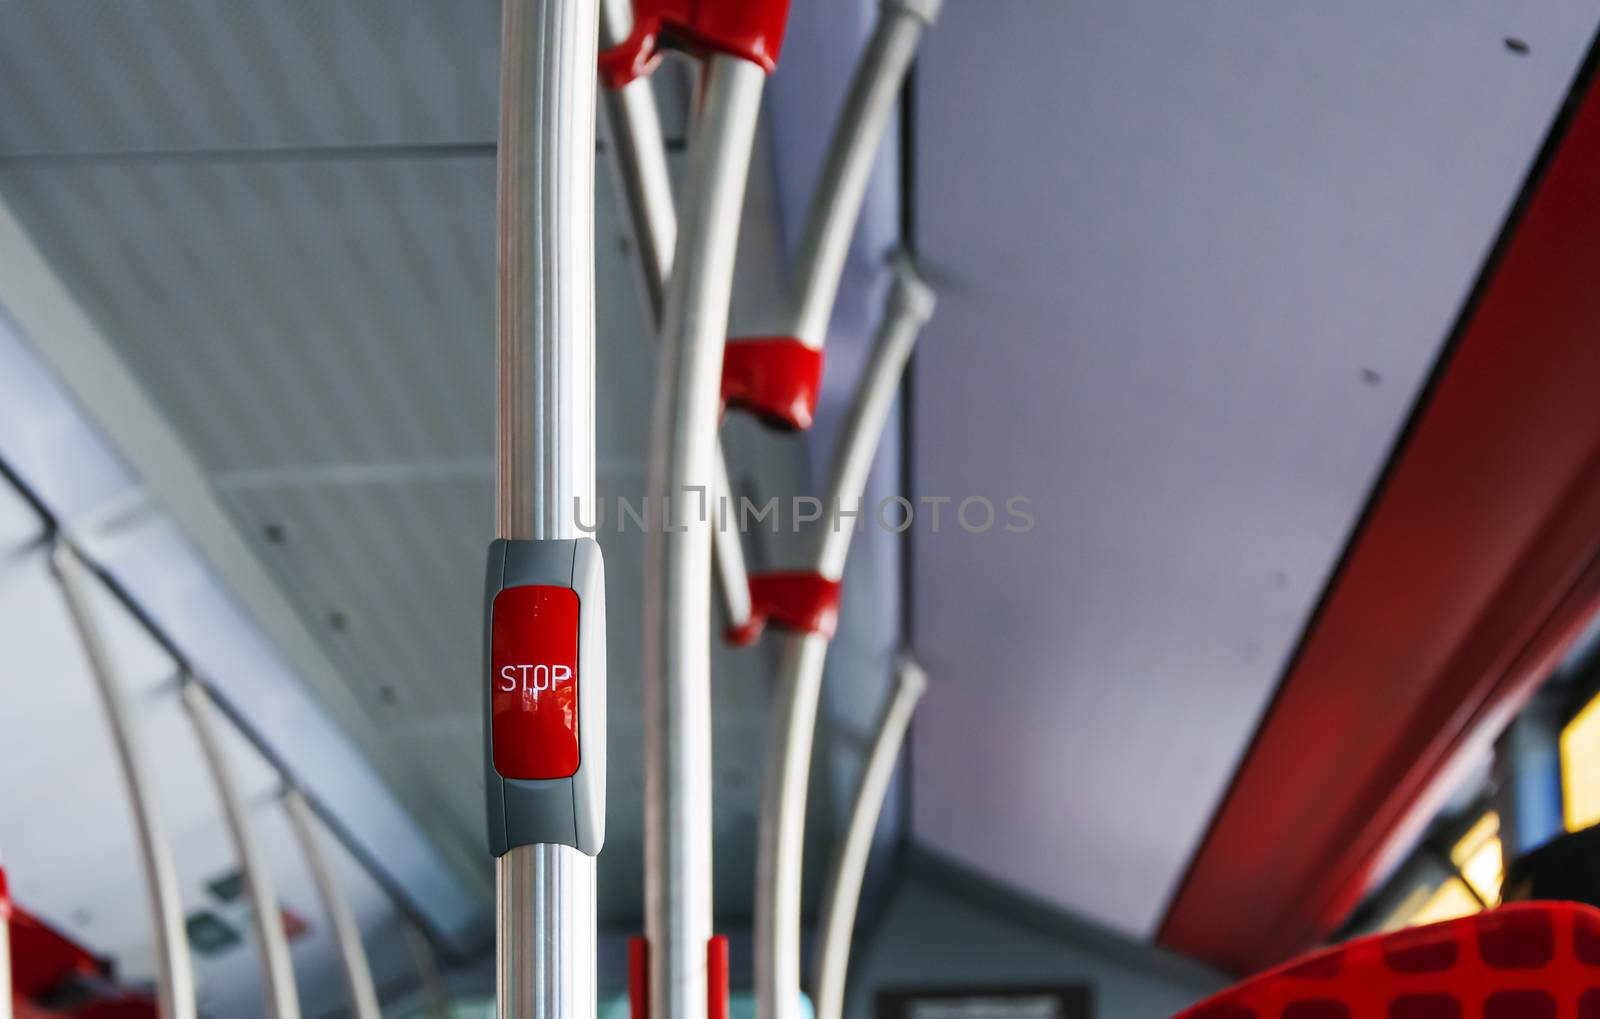 red button to book the stop in a public bus. Public transportation concept